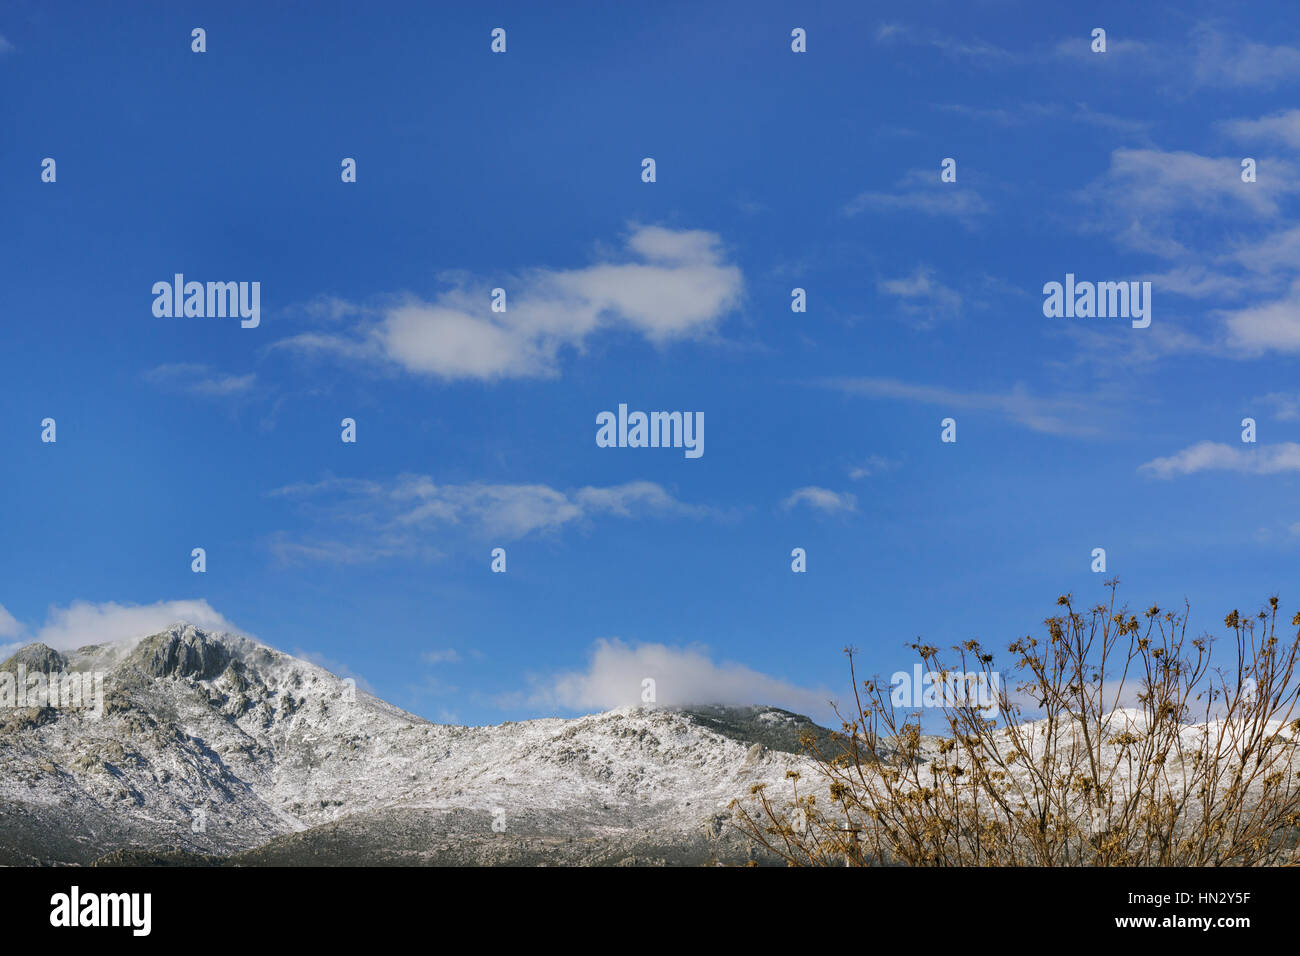 Snowy landscape in winter time. Subject captured after snow storm over blue sky background. Stock Photo